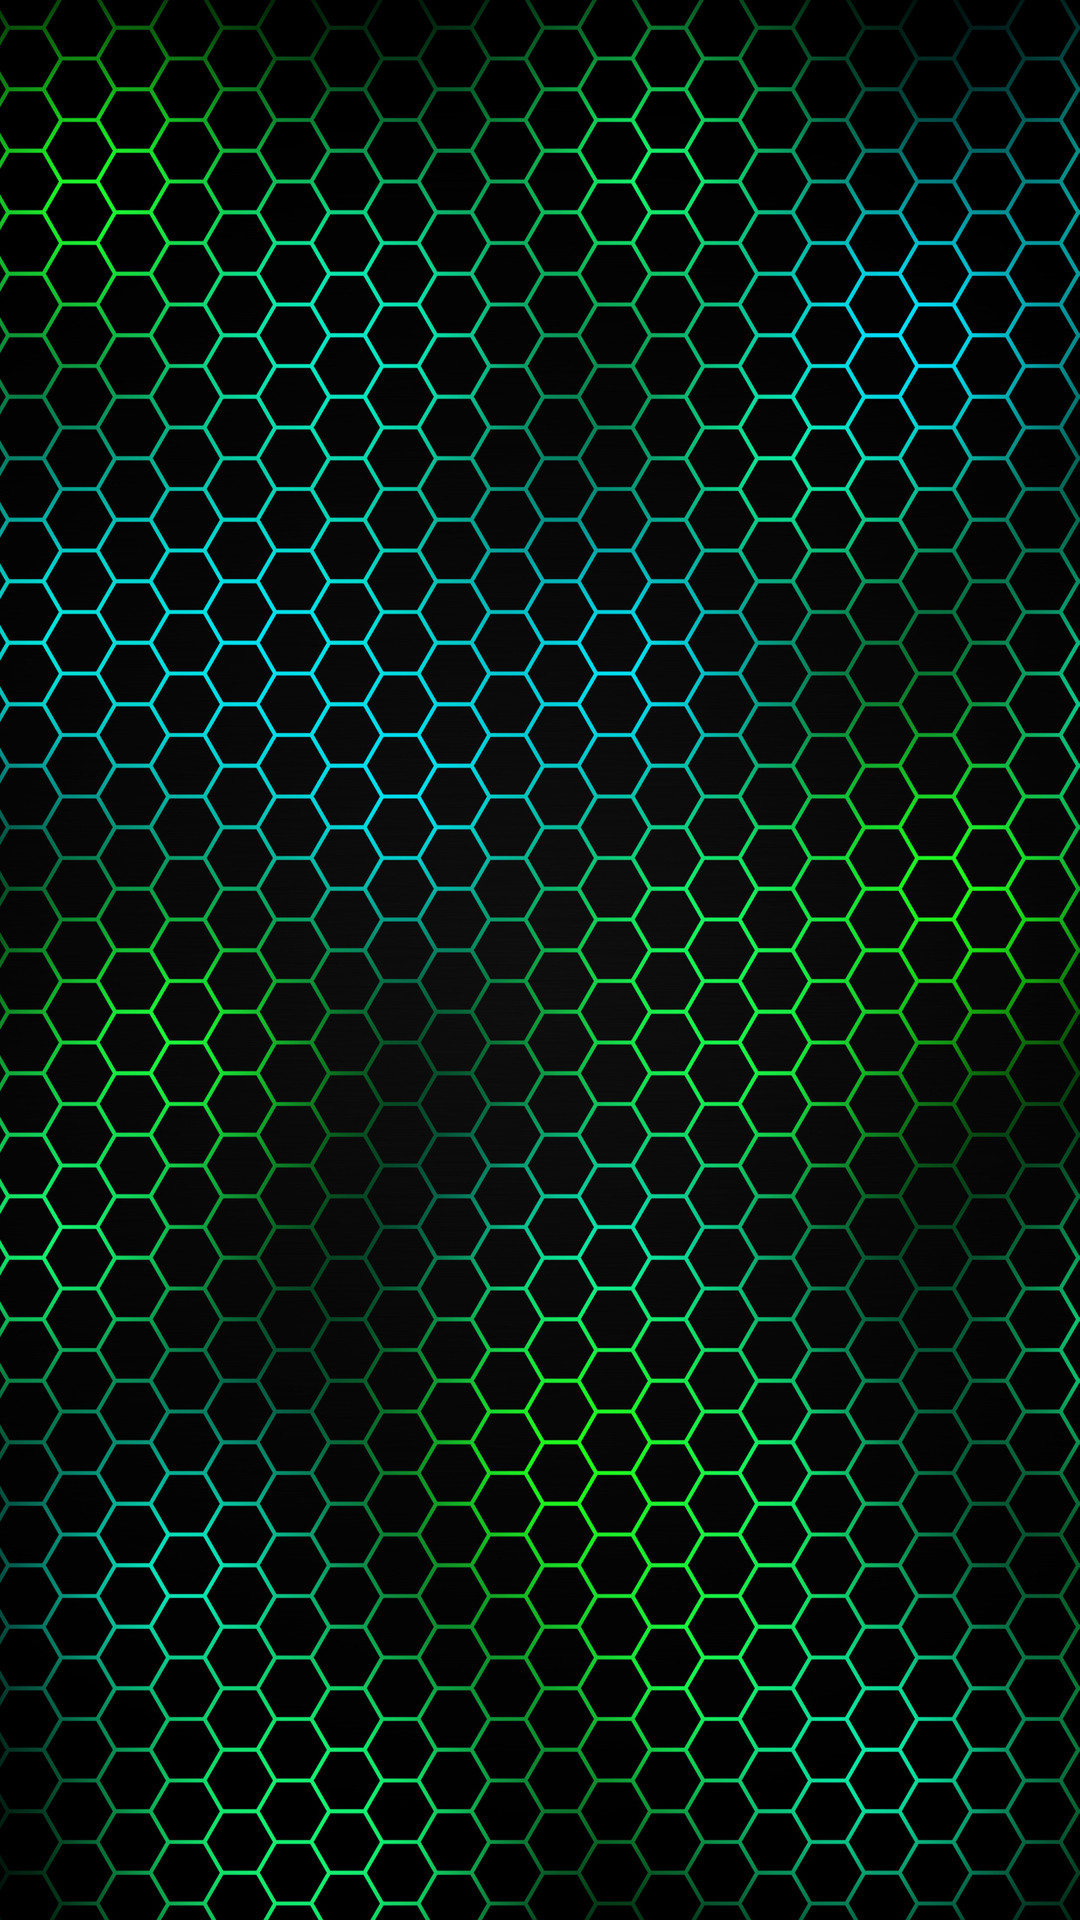 1080x1920 Blue and green under the hexagon pattern Wallpaper